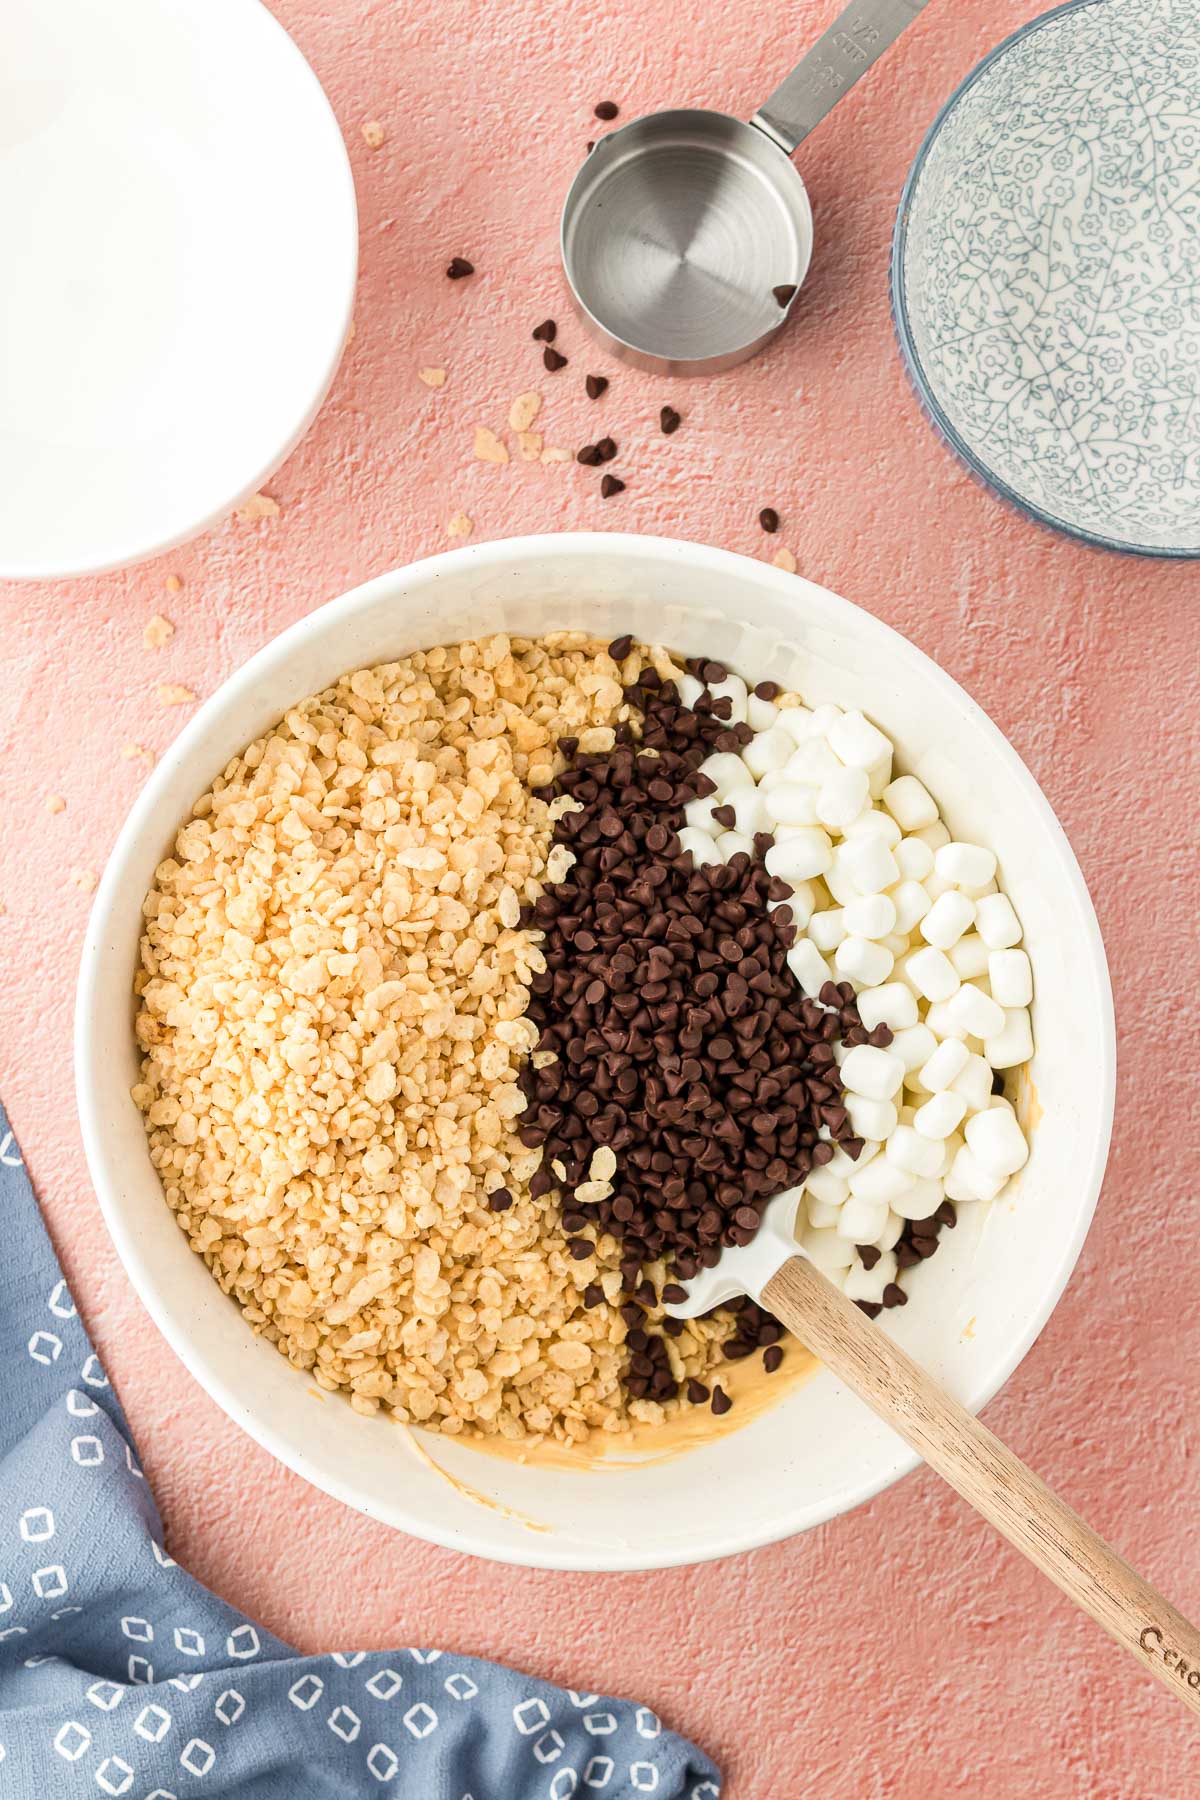 Rice krispies, chocolate chips, and mini marshmallows in a white bowl.